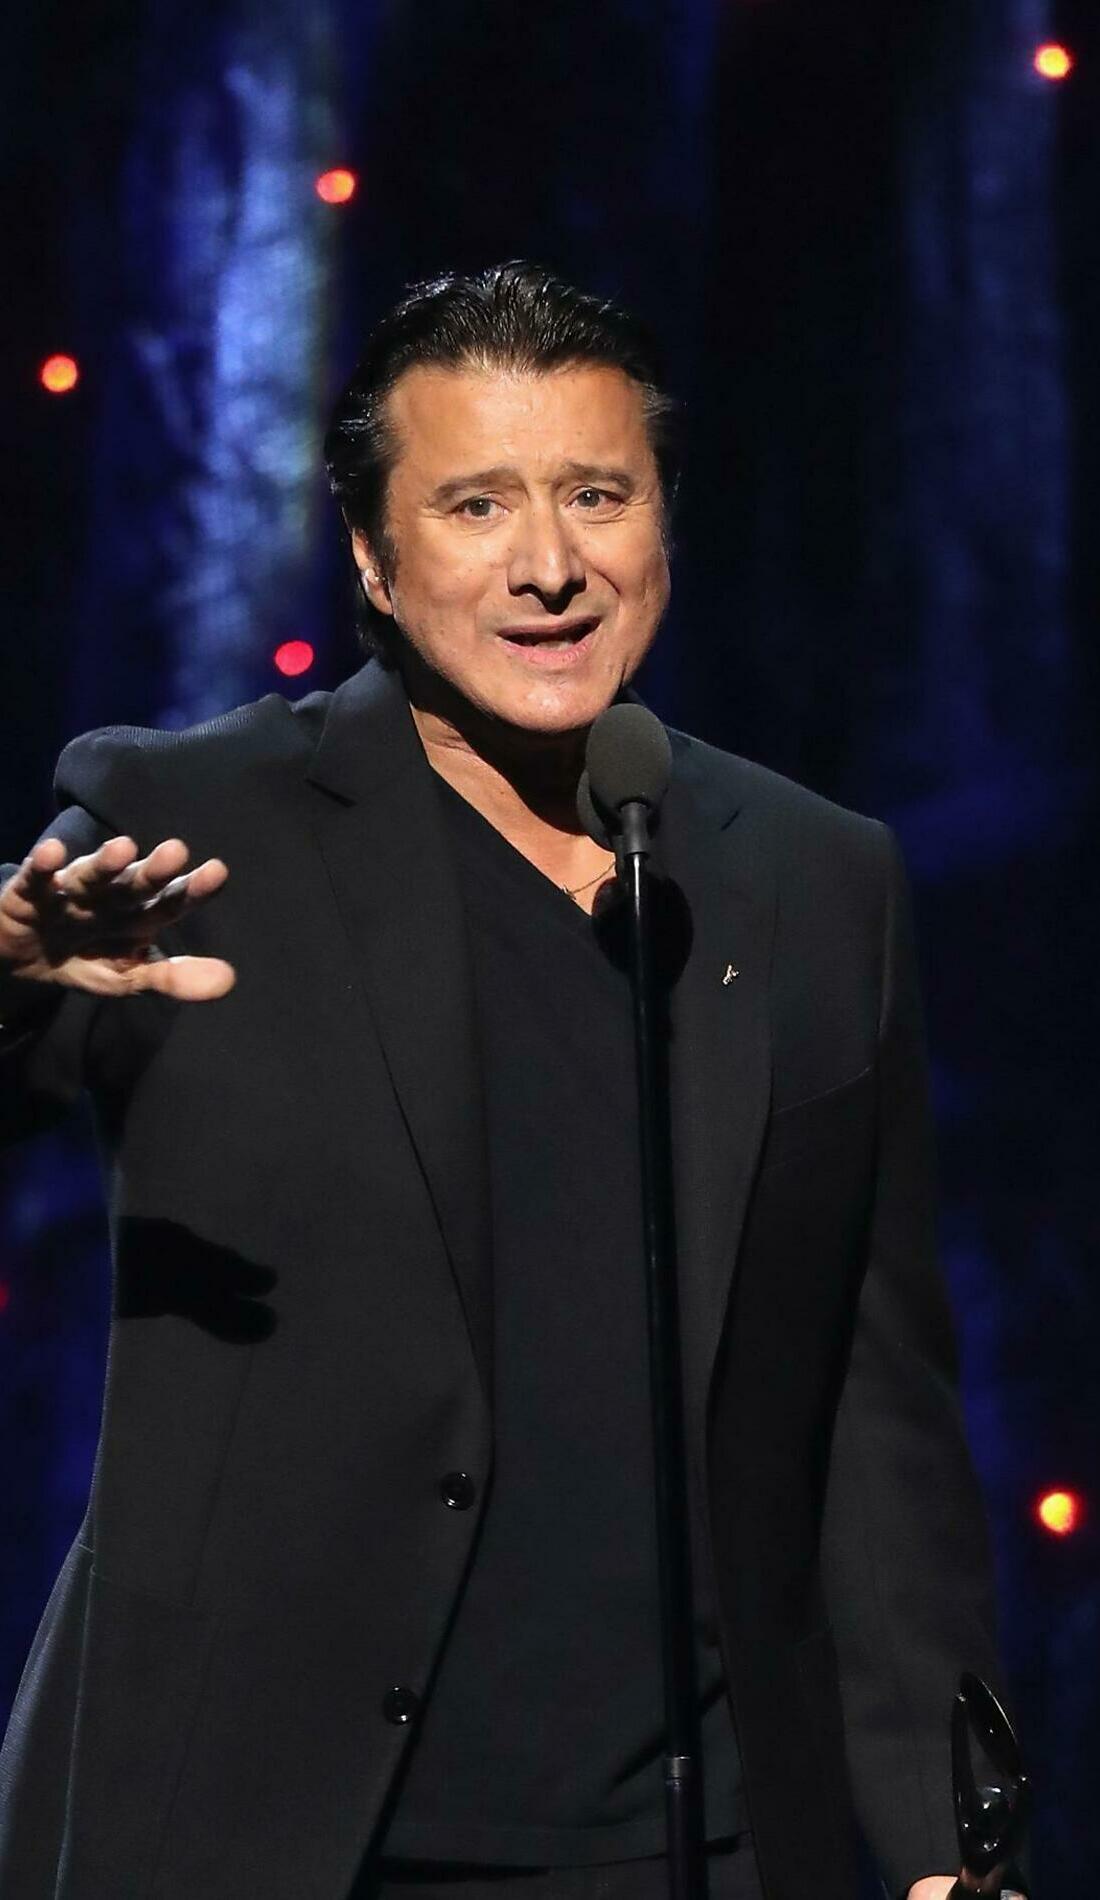 A Steve Perry live event